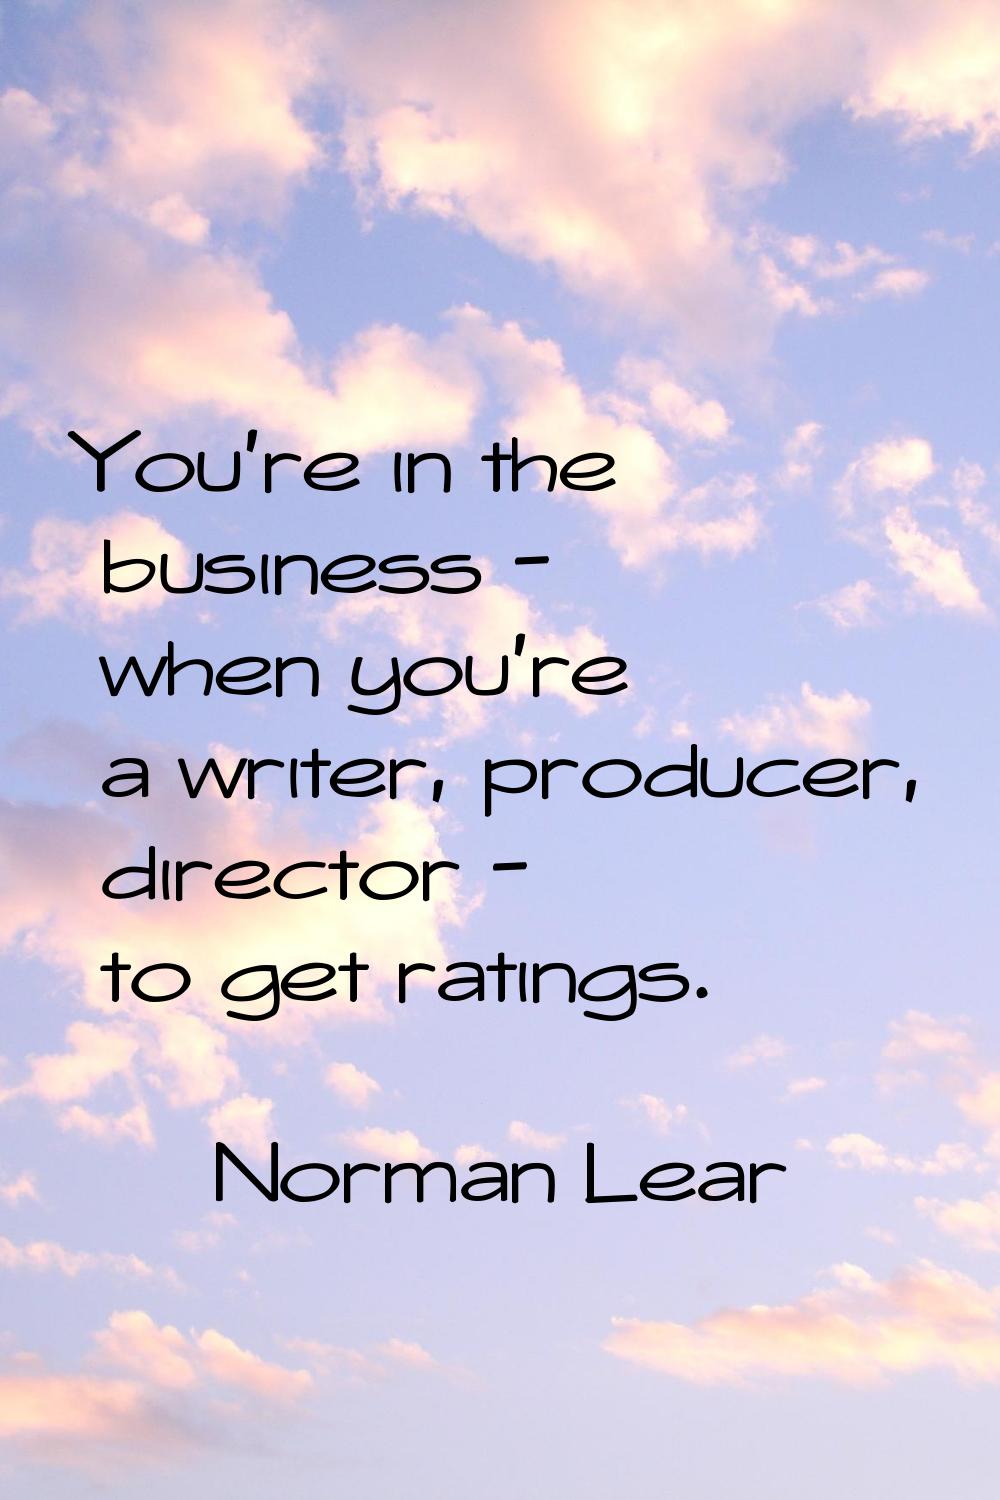 You're in the business - when you're a writer, producer, director - to get ratings.